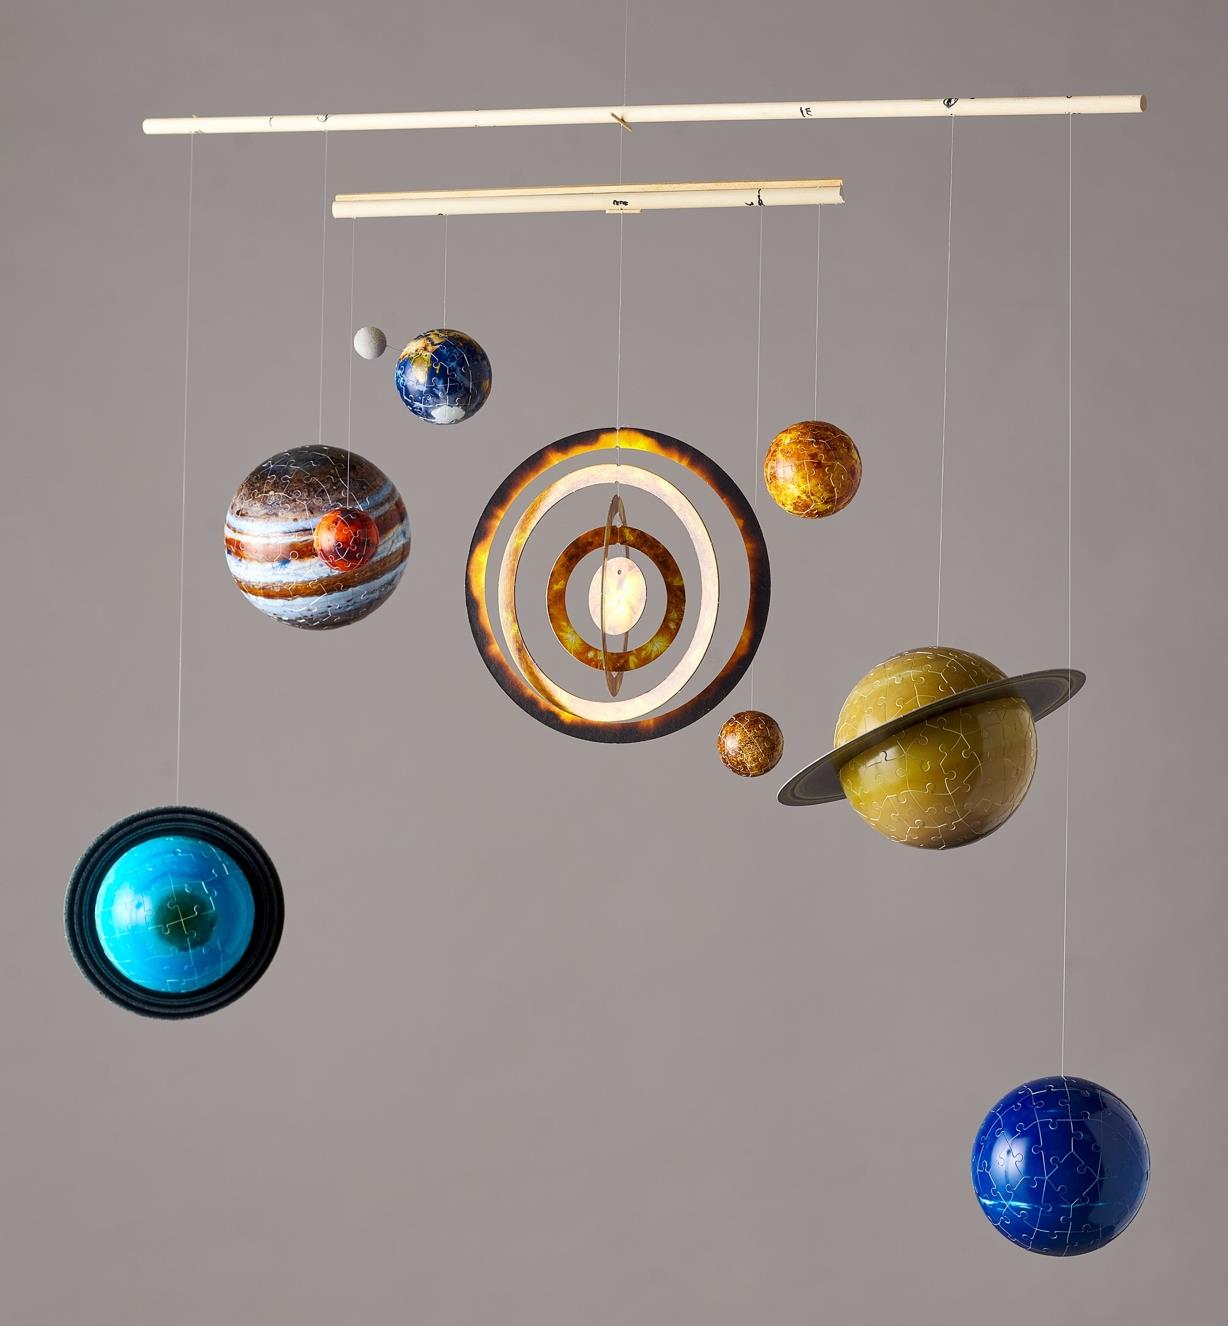 Assembled planets hanging from a mobile, forming a model of the solar system